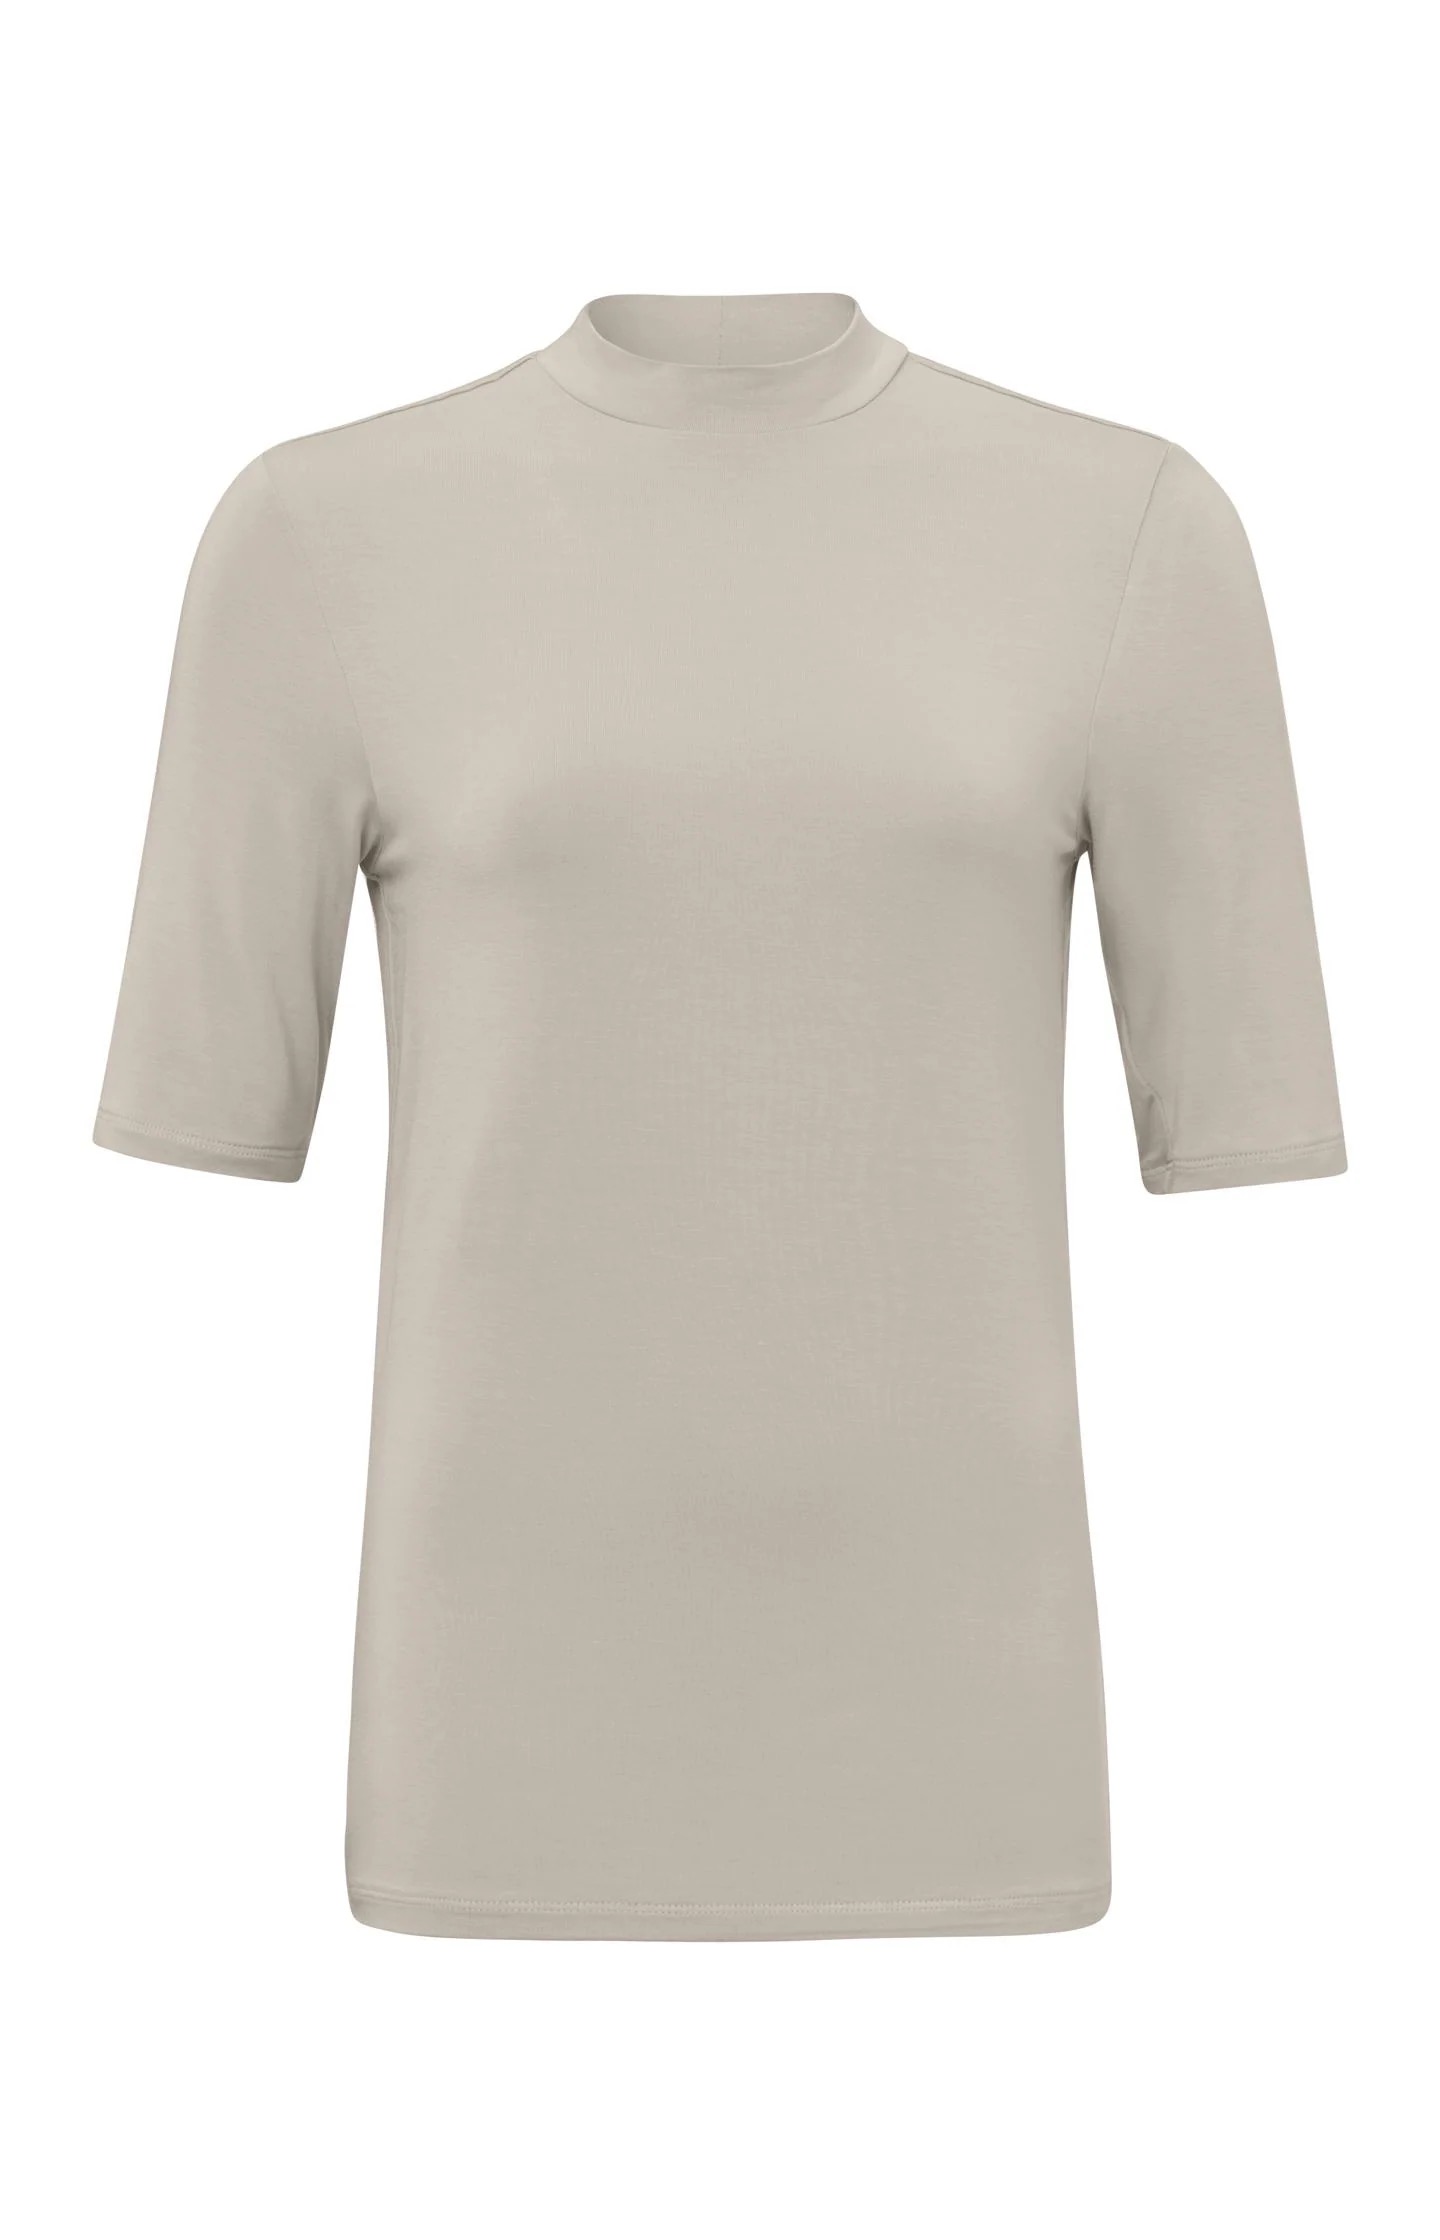 Yaya T-shirt With High Neck And Short Sleeves In Regular Fit - Silver Lining Beige